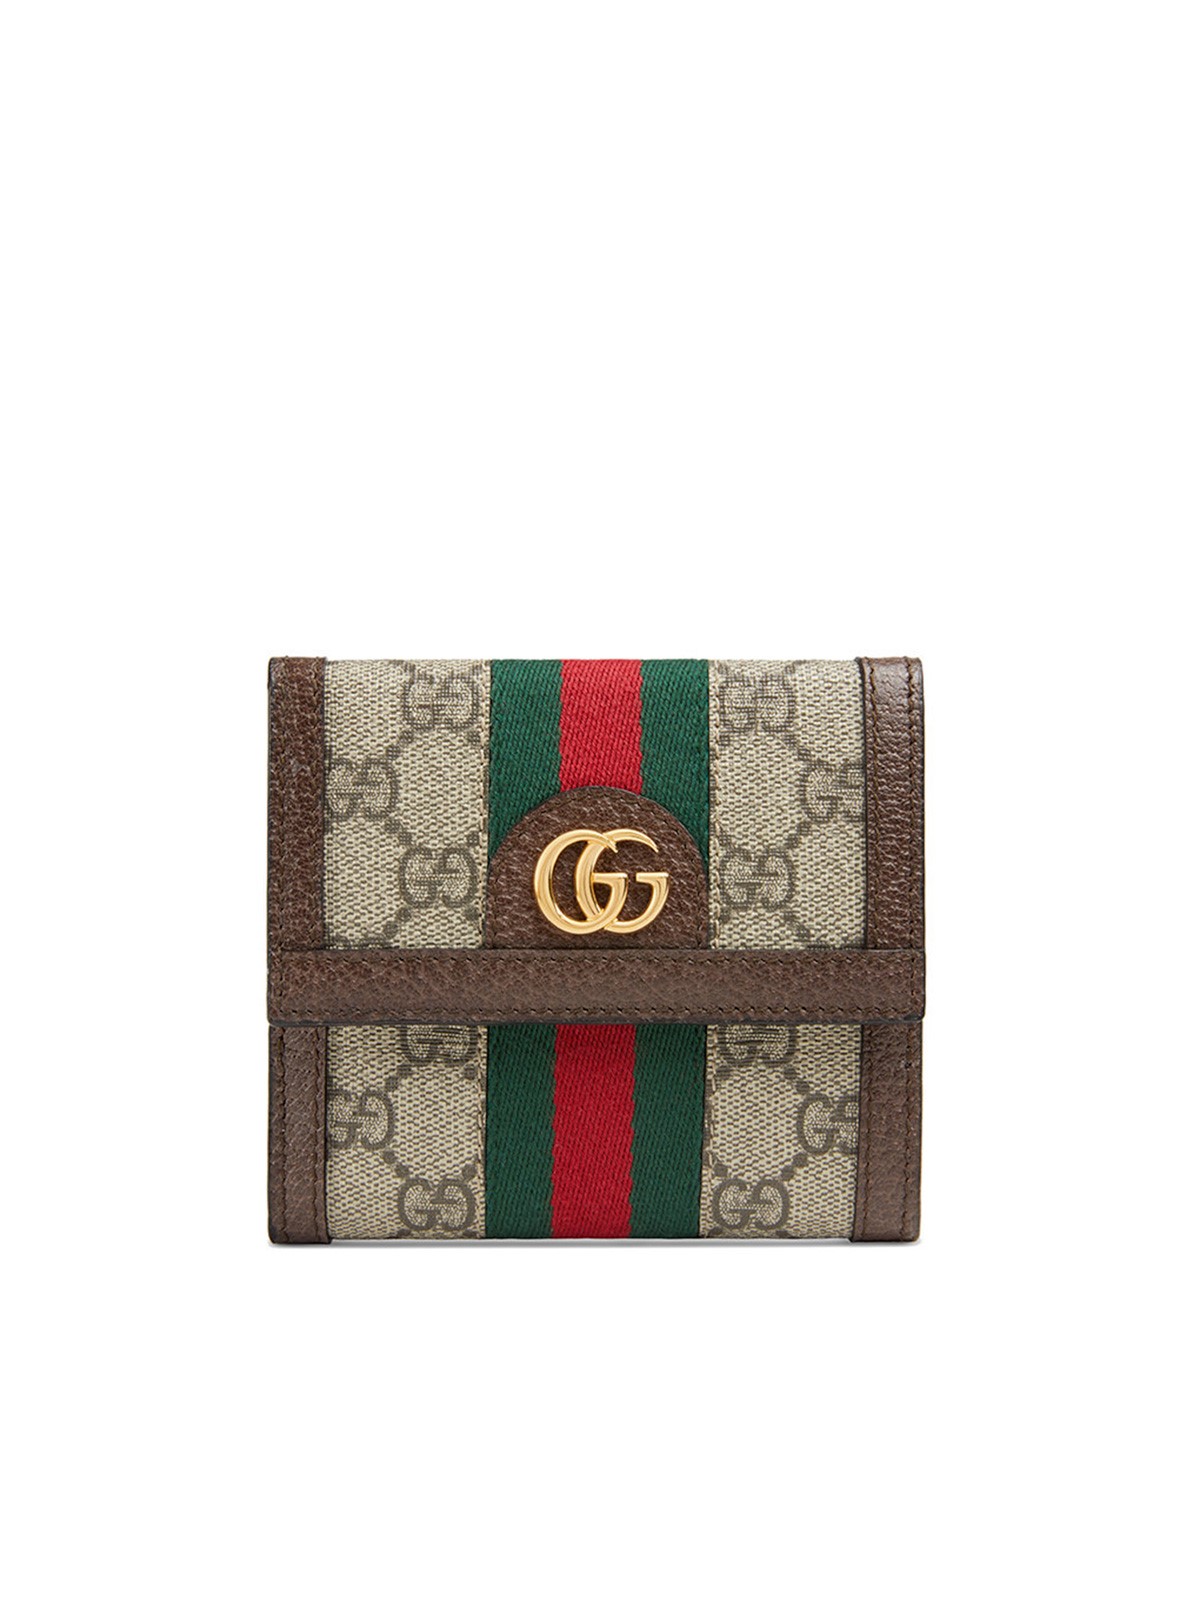 gucci OPHIDIA WALLET available on www.waldenwongart.com - 22767